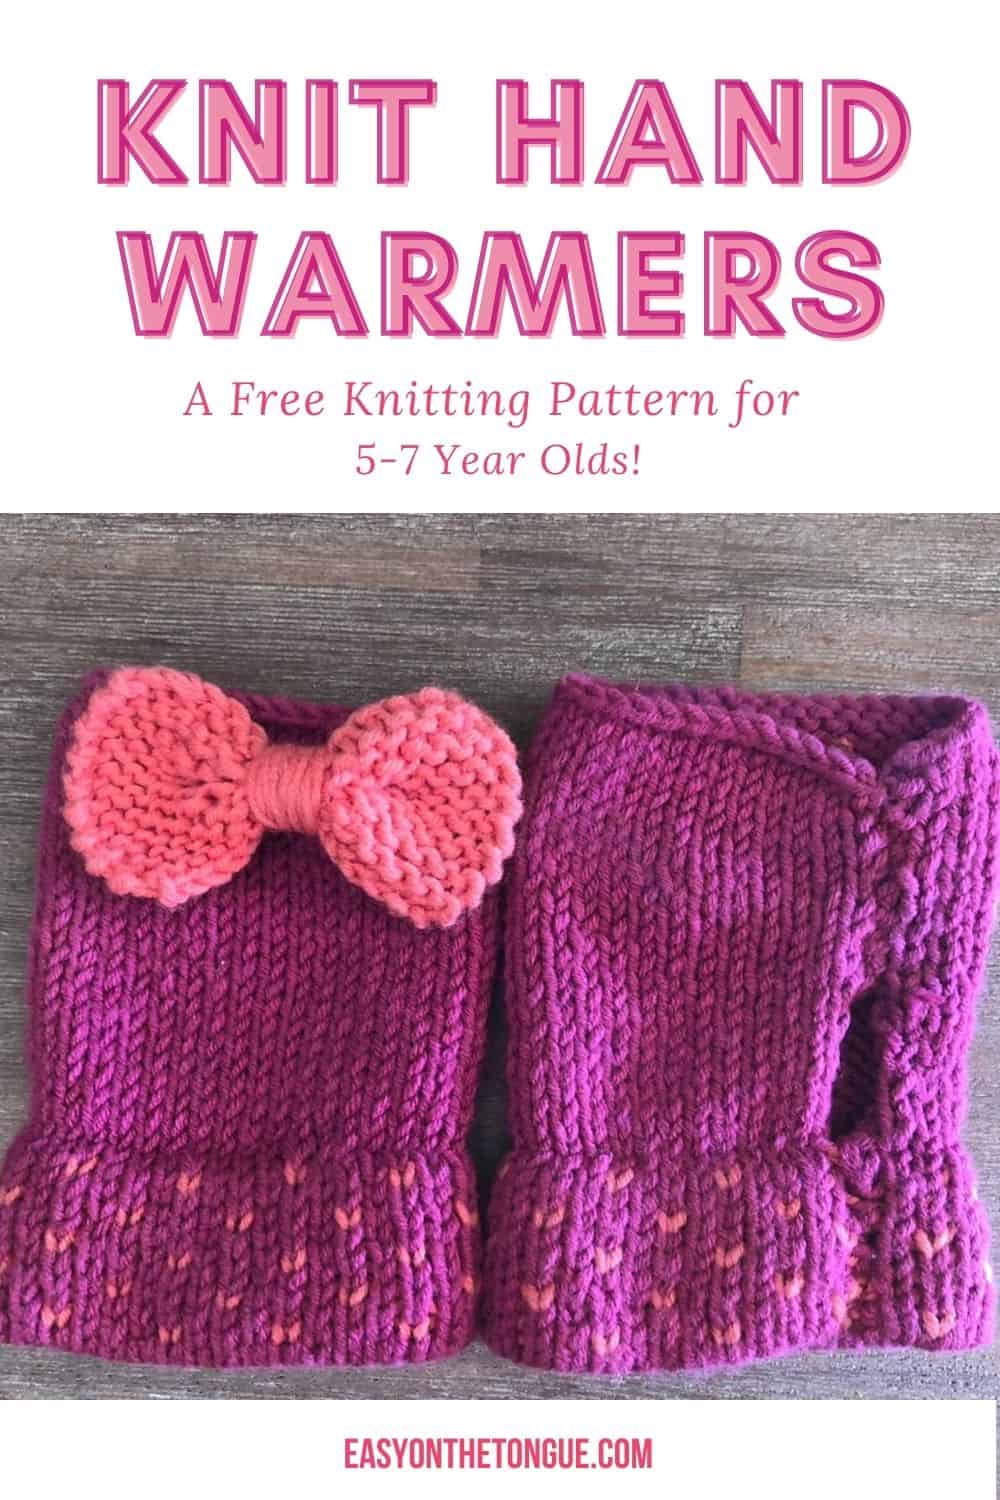 Knit hand warmers a knitting pattern for 5 7 year olds on easyonthetongue.com 1 Easy Knitting Pattern for Adorable Kids Hand Warmers